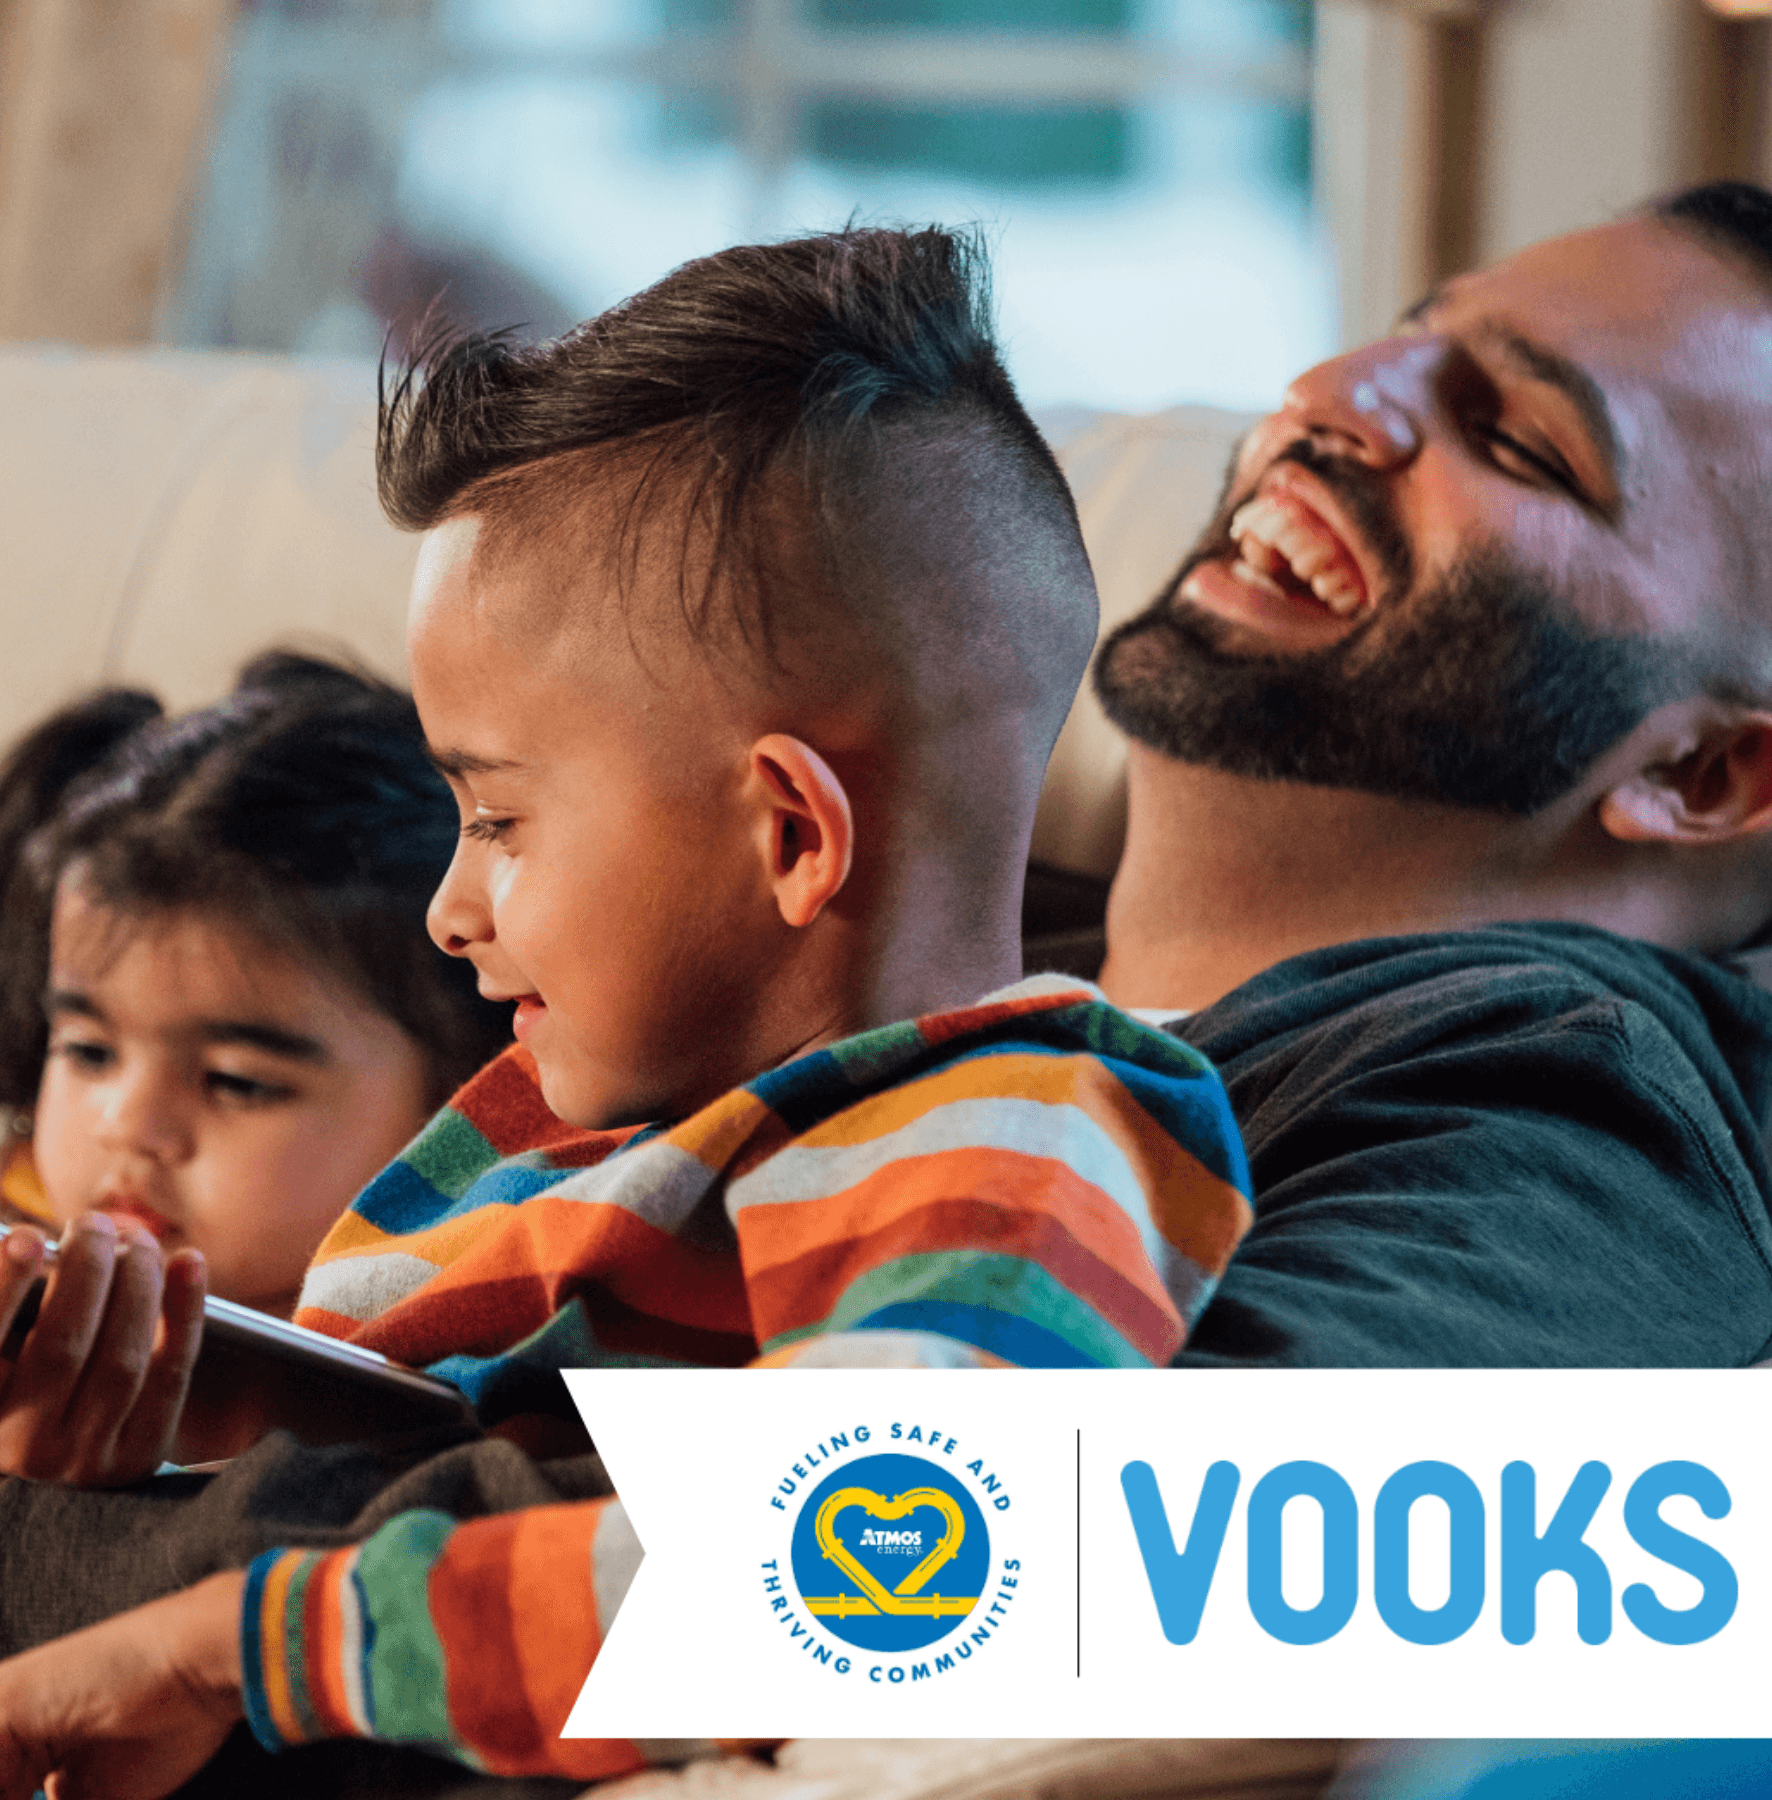 Vooks - stories brought to life